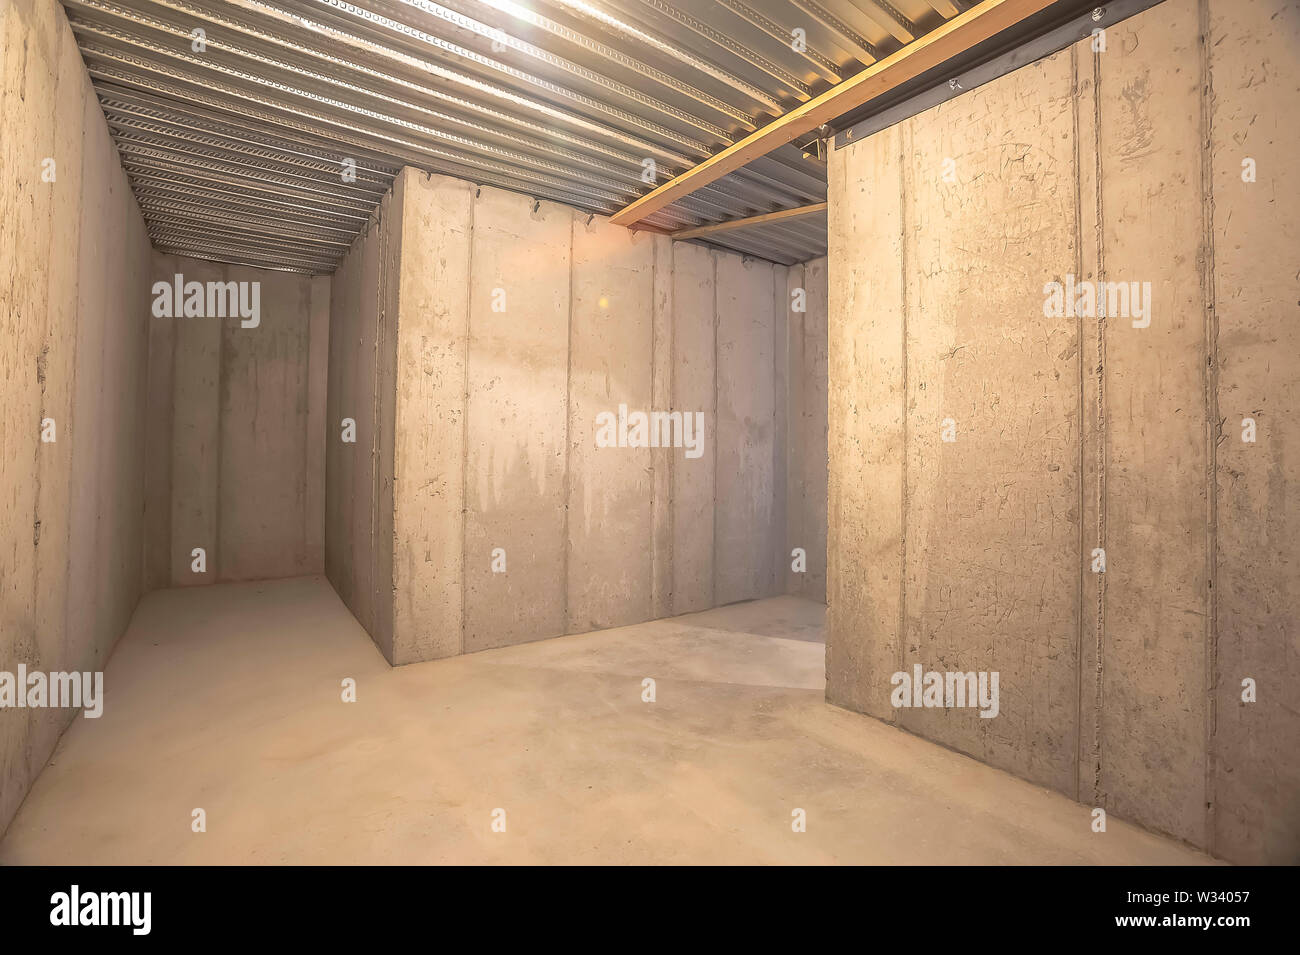 Interior Of An Empty Building With Concrete Wall And